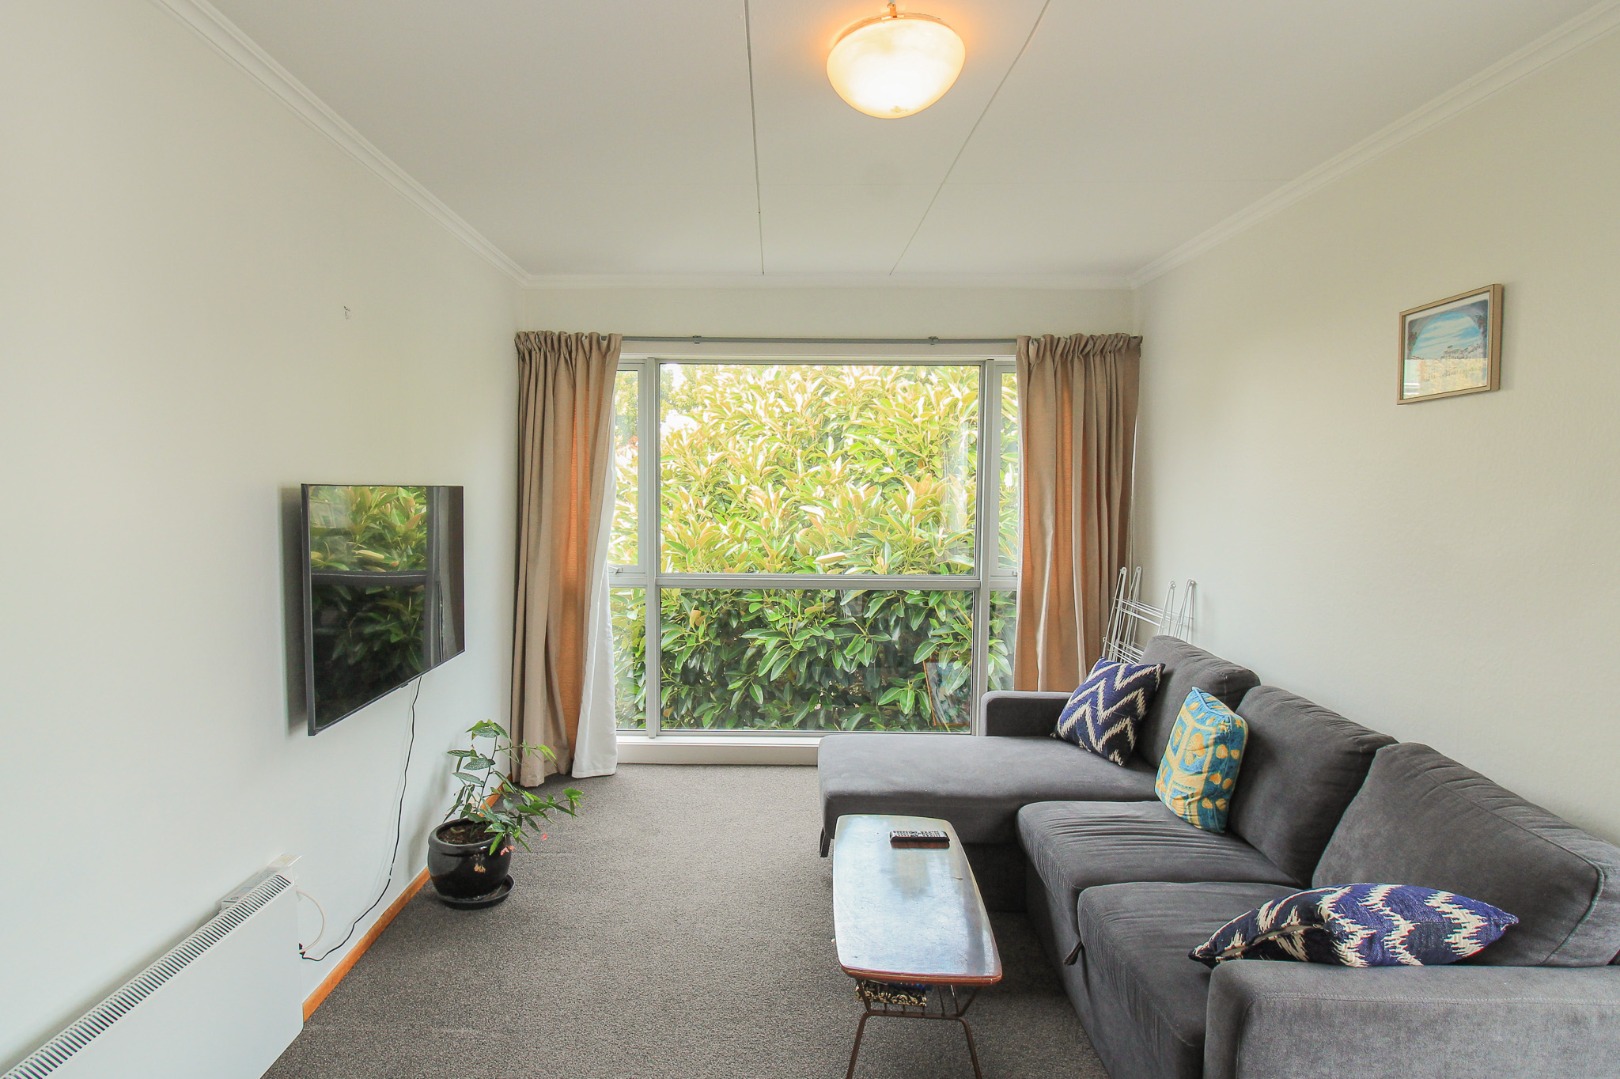 Real Estate For Rent Houses & Apartments : 2-bed in Mount Victoria, Wellington